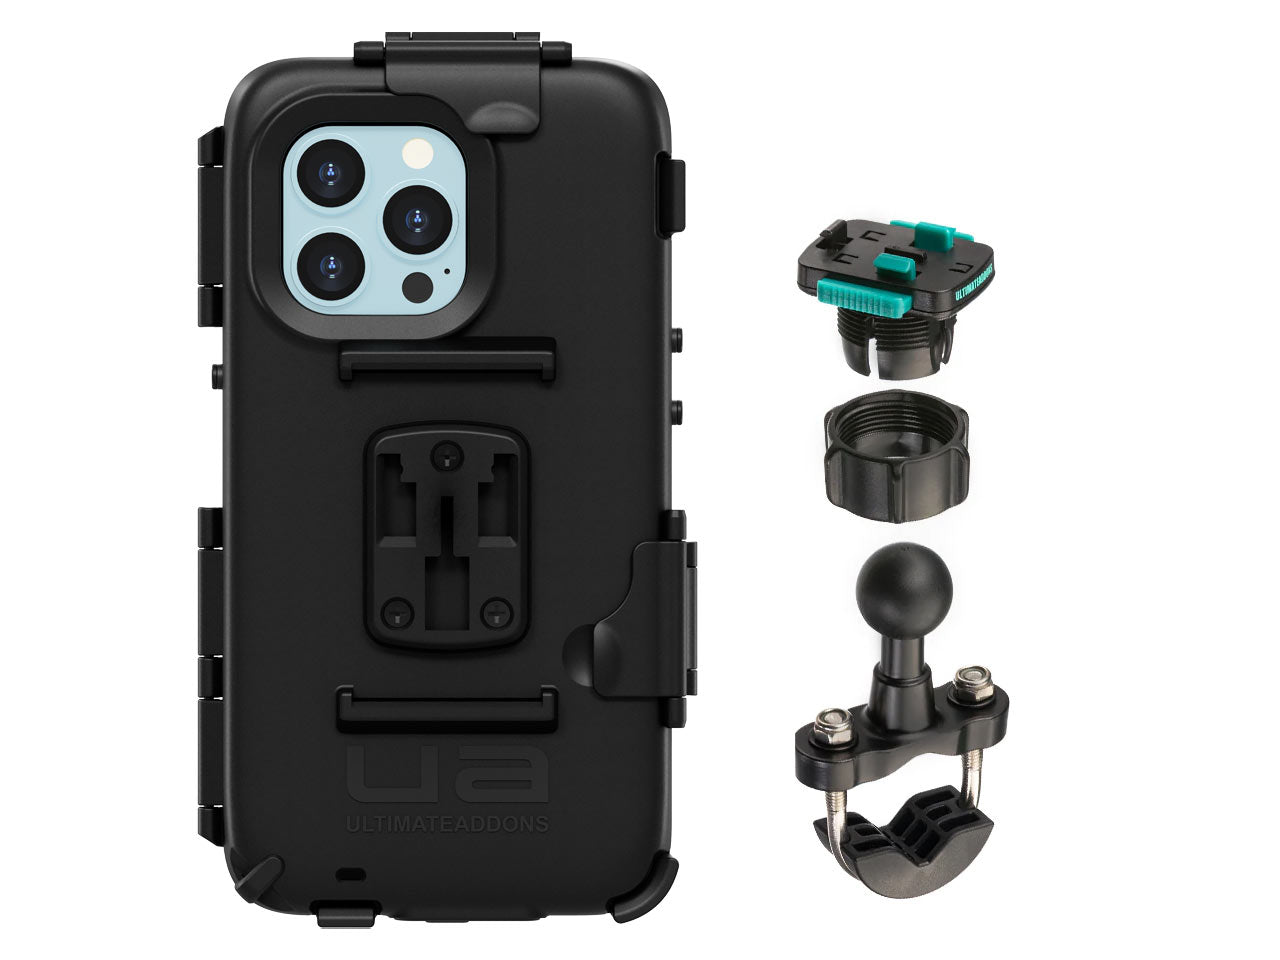 Ultimateaddons Waterproof Tough Case iPhone Attachments